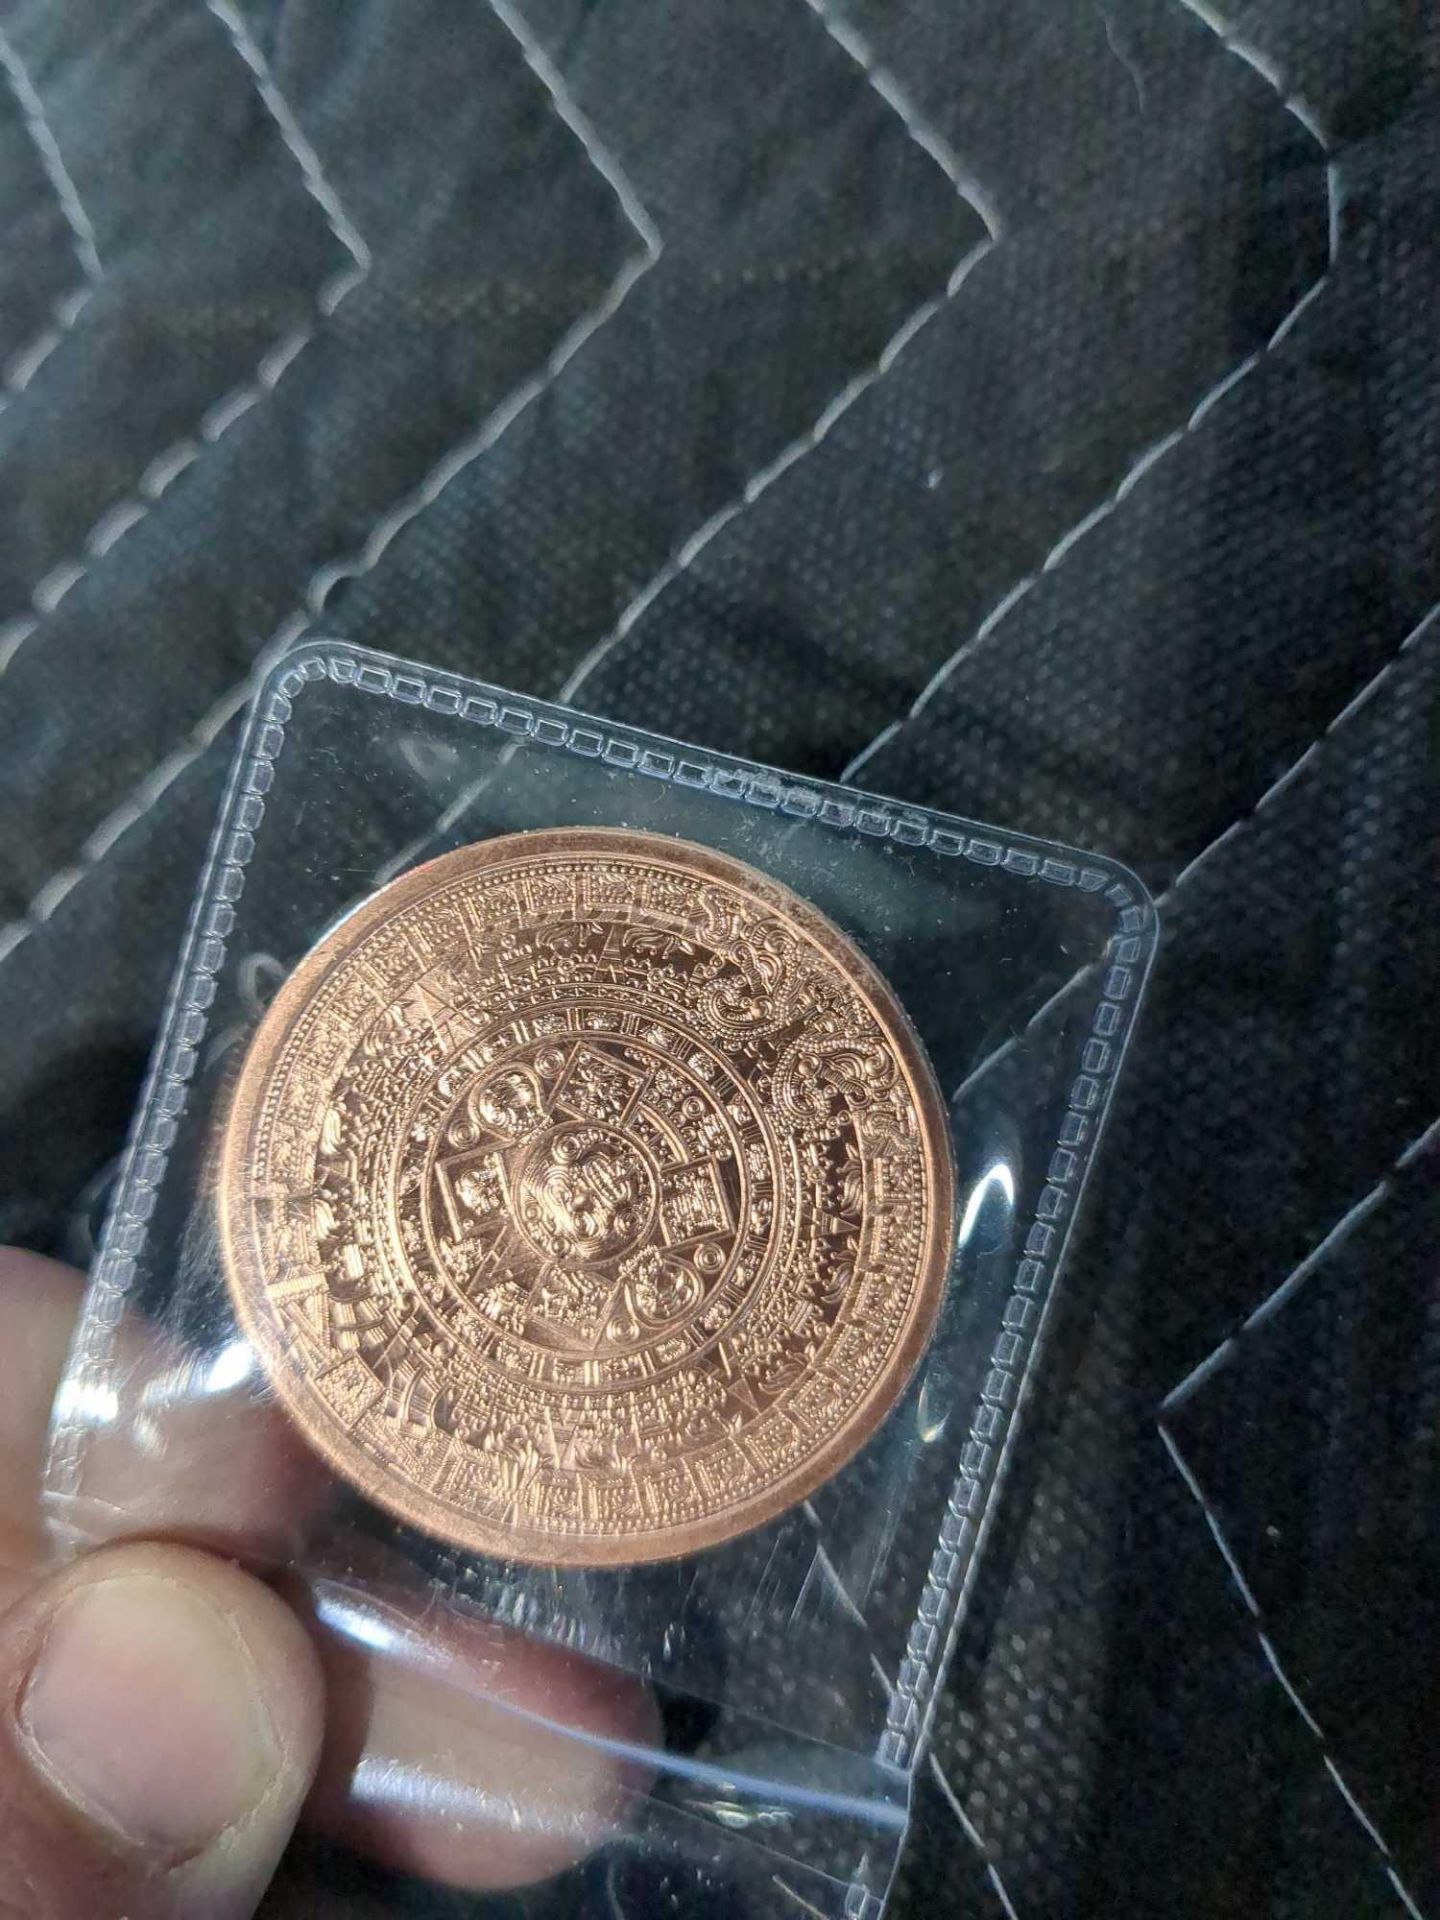 Copper & Silver Aztec Type Coins - Image 3 of 5